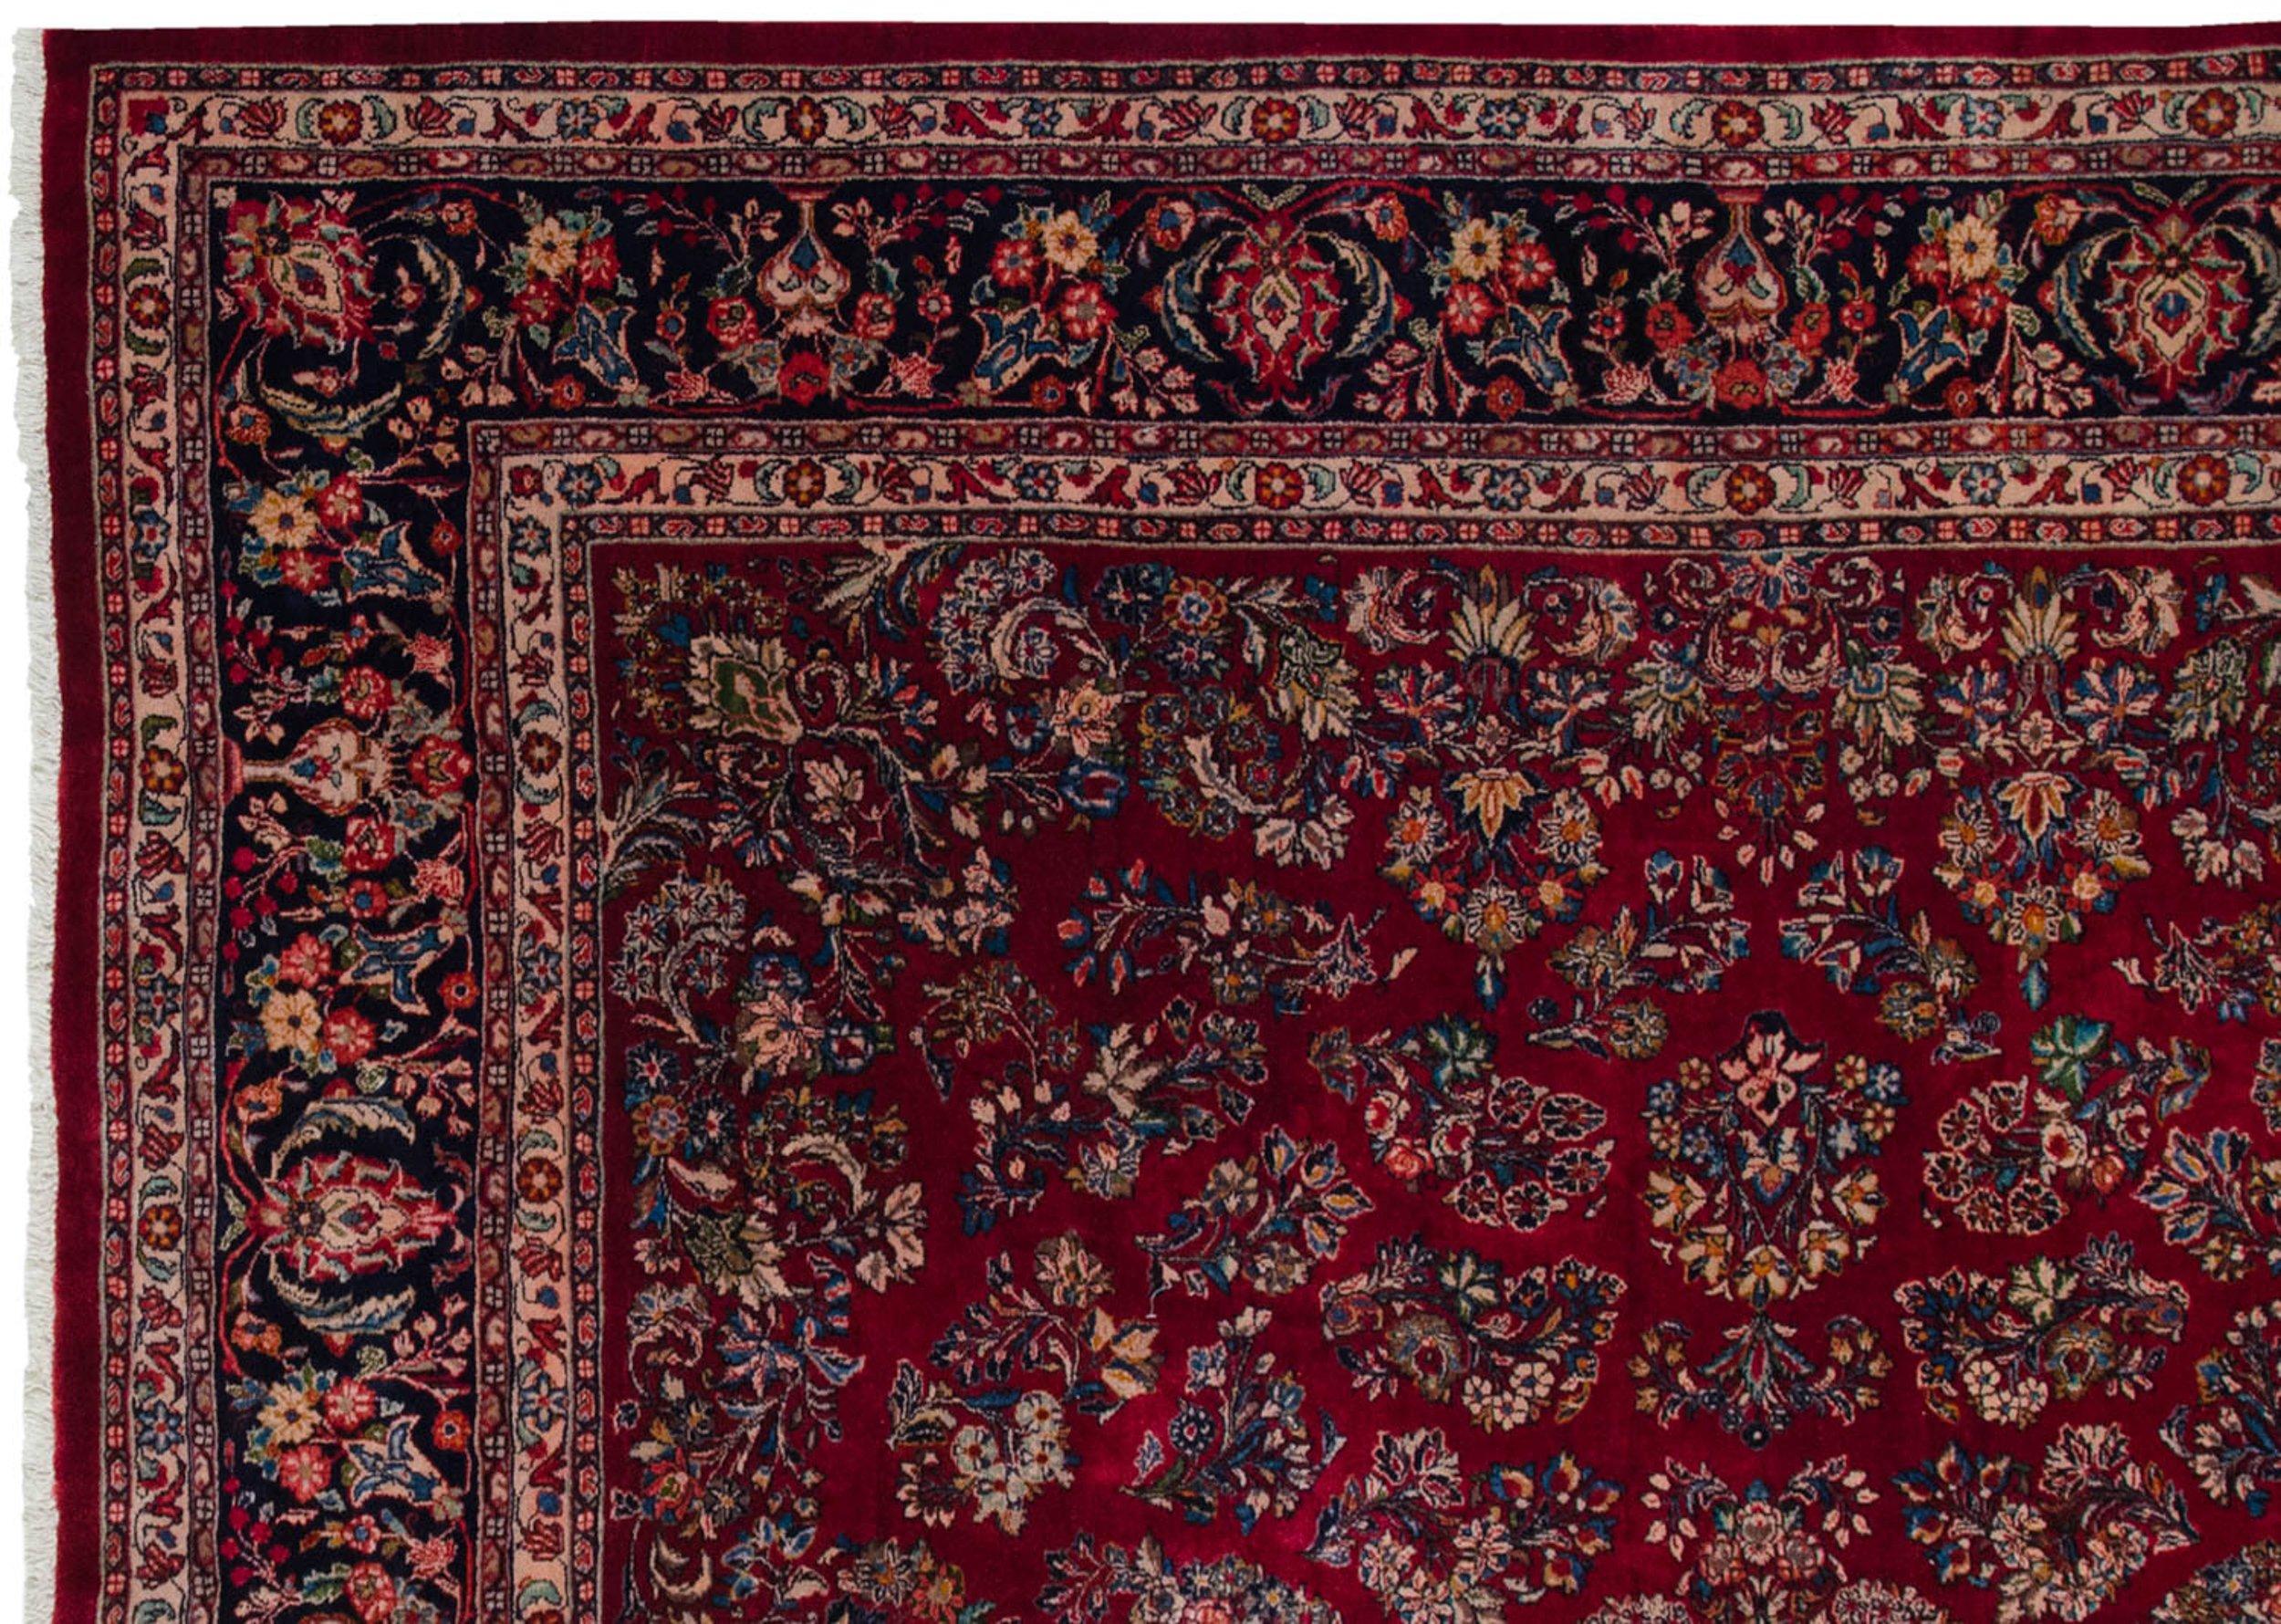 :: Allover covered field in floral sprays and bouquets in a classic Sarouk motif from the early and mid 20th century. Phenomenal gem tone shades paired with emaculate condition and hard to find scale and proportions. Colors and shades include: Ruby